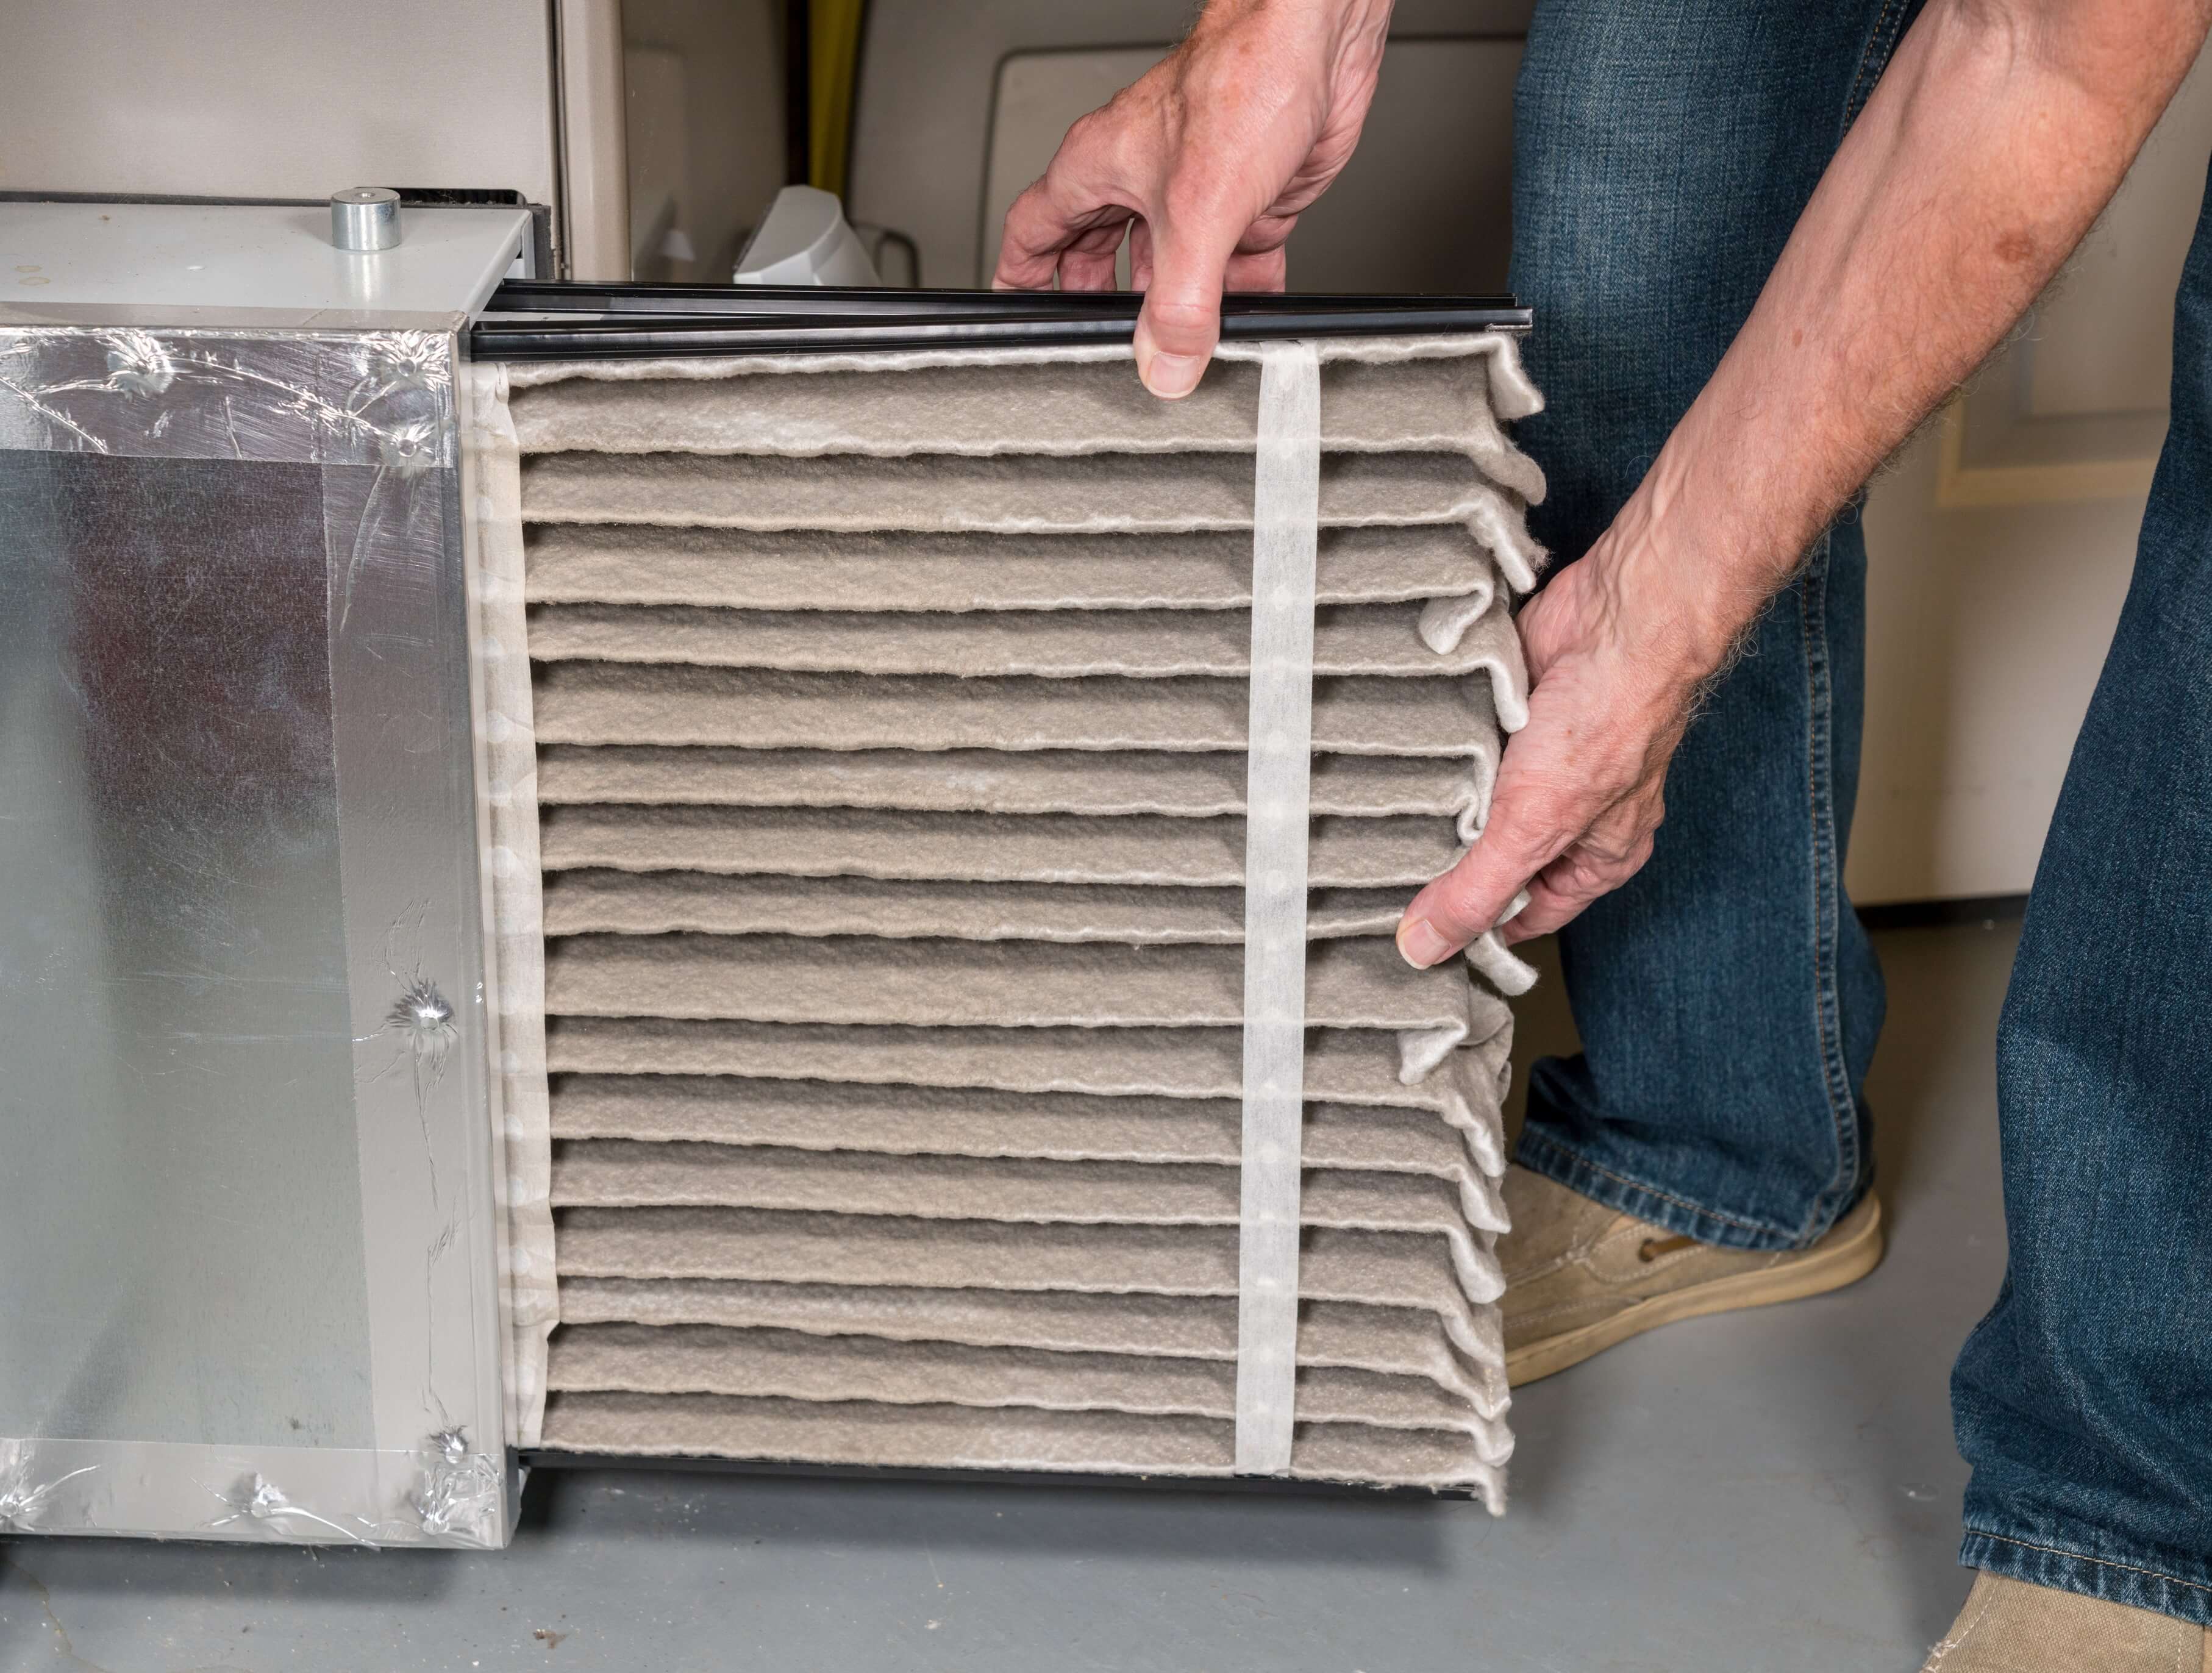 A Furnace Replacement Could Improve Your Health